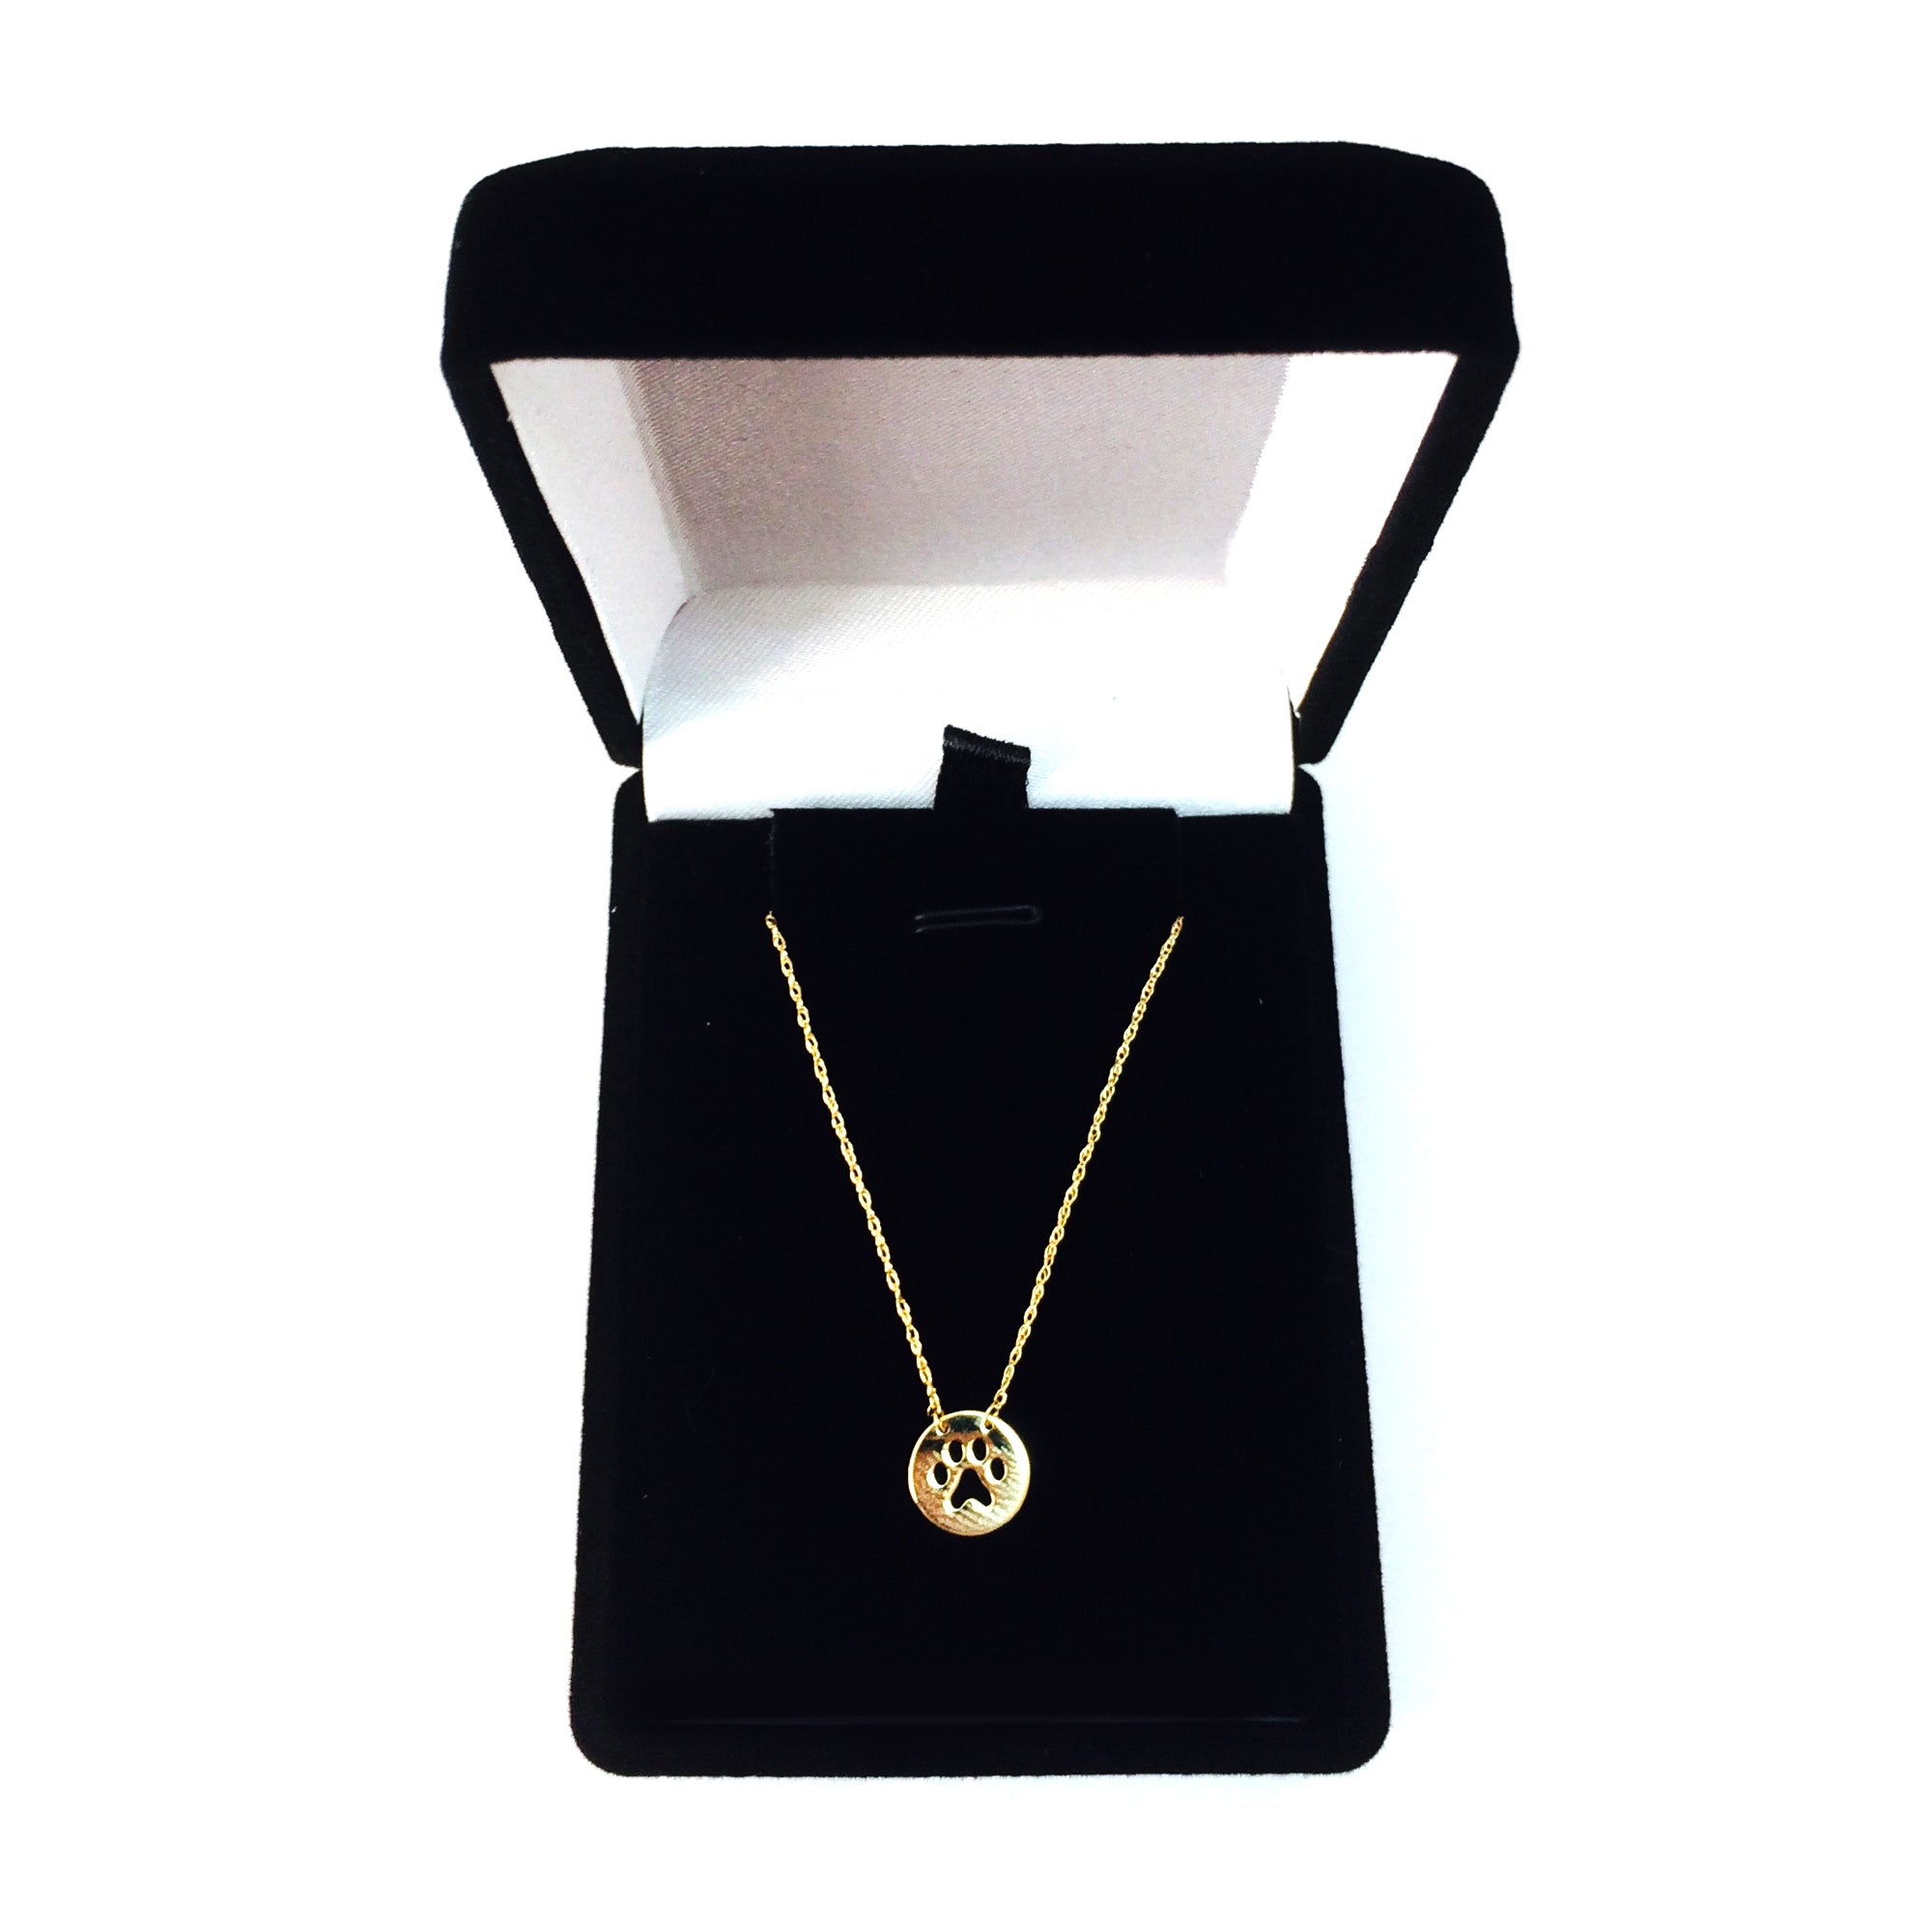 14K Yellow Gold Mini Paw Print Pendant Necklace, 16" To 18" Adjustable fine designer jewelry for men and women